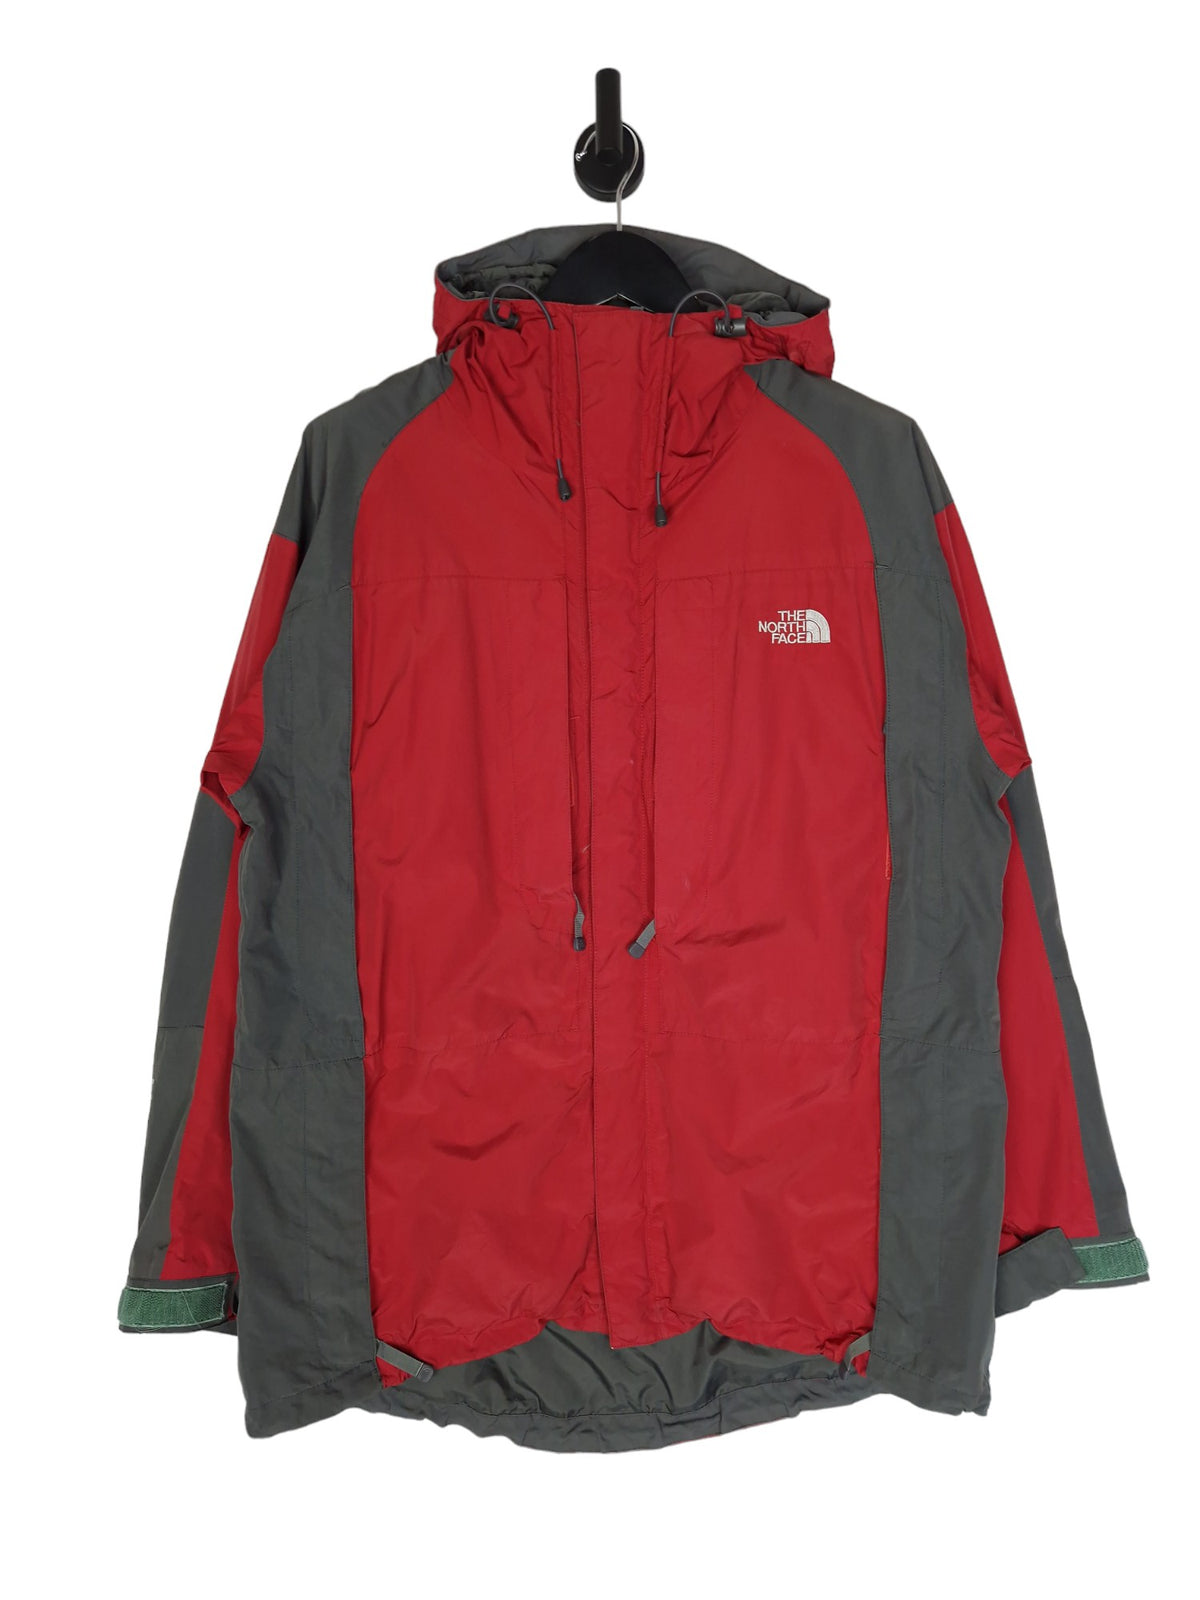 The North Face Gore-Tex XCR Summit Series Jacket - Size  M/L